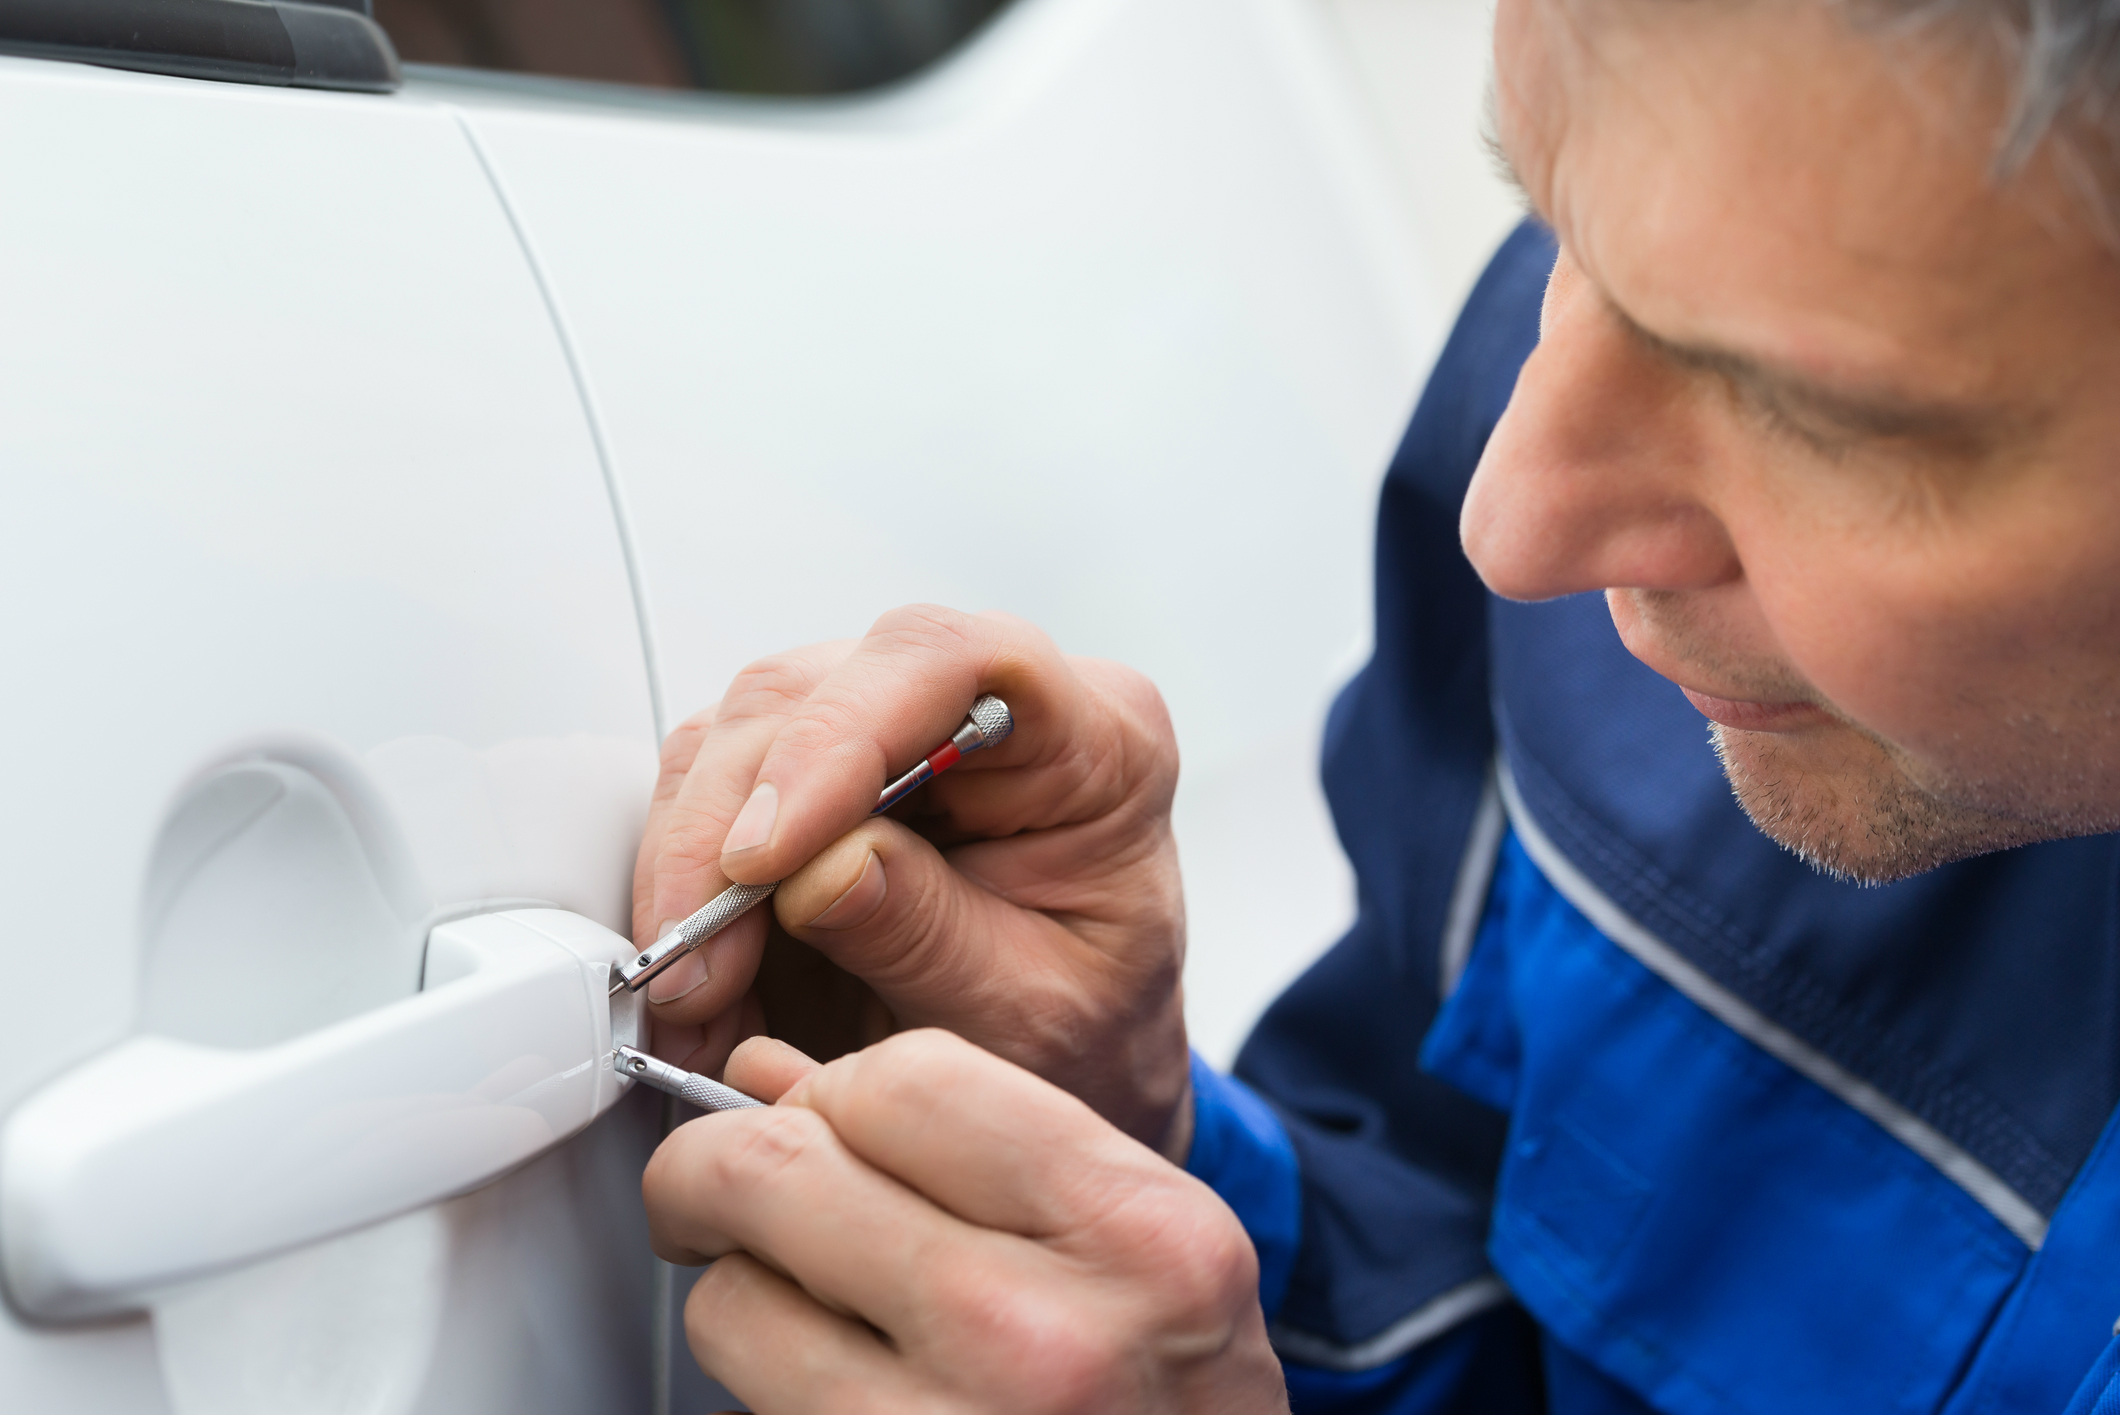 How to find a local car locksmith